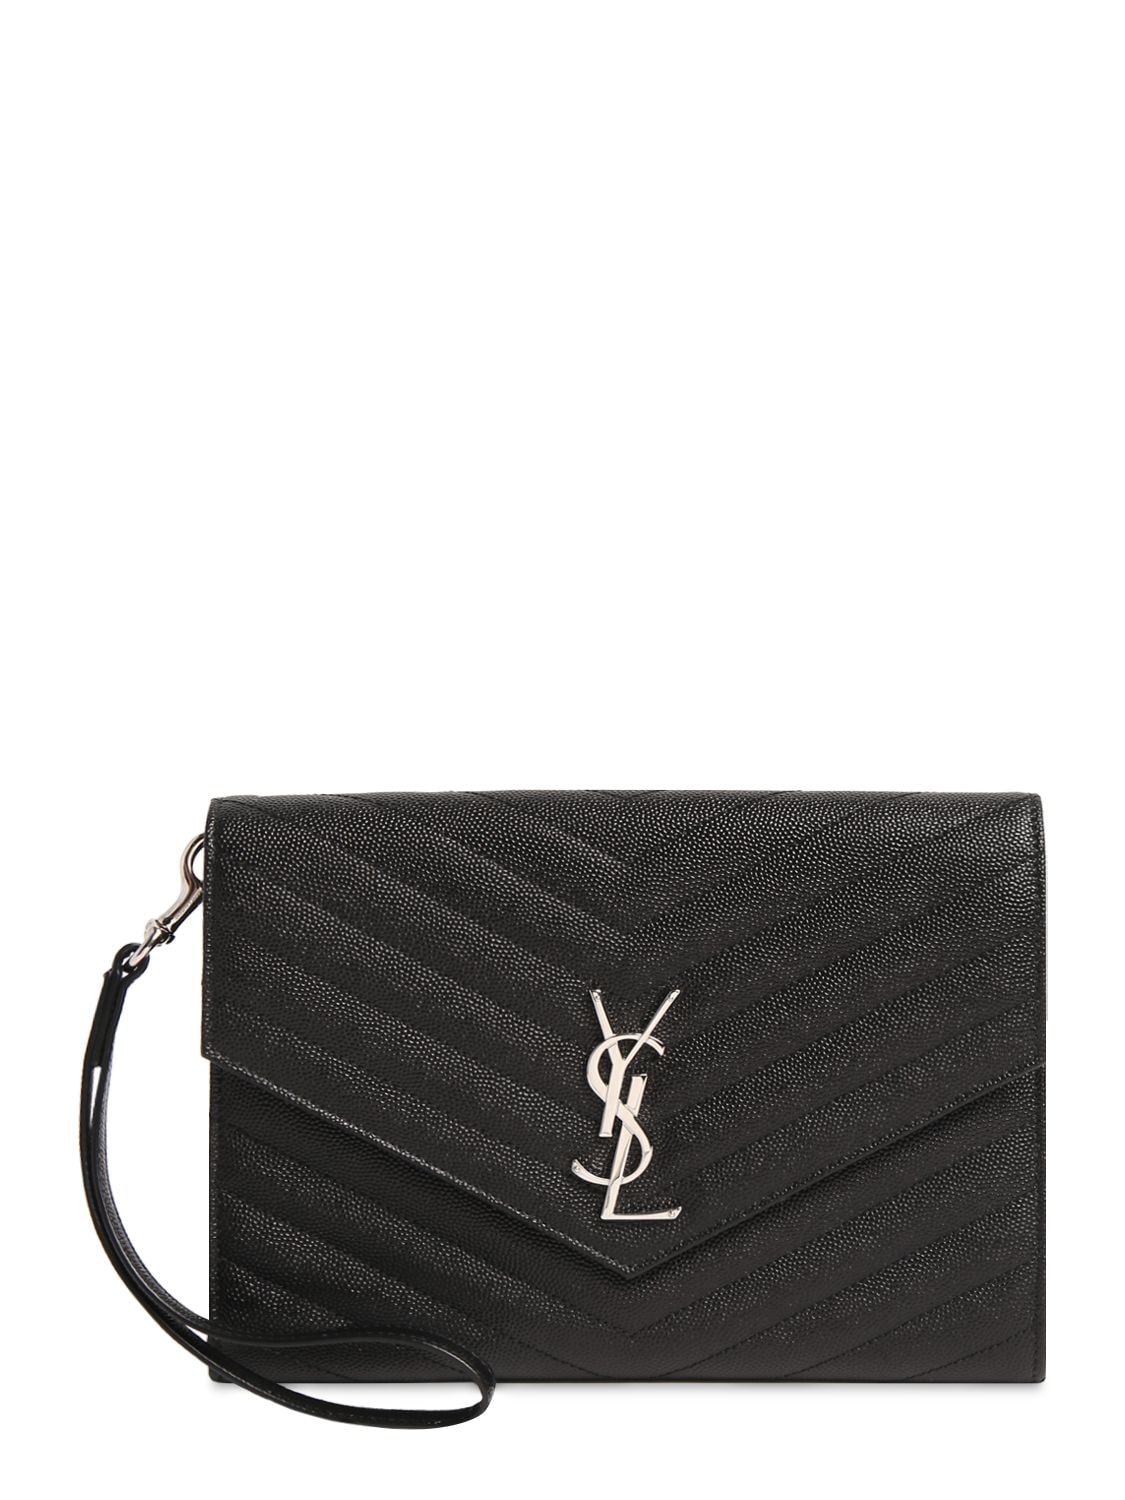 Image of Monogram Embossed Leather Clutch